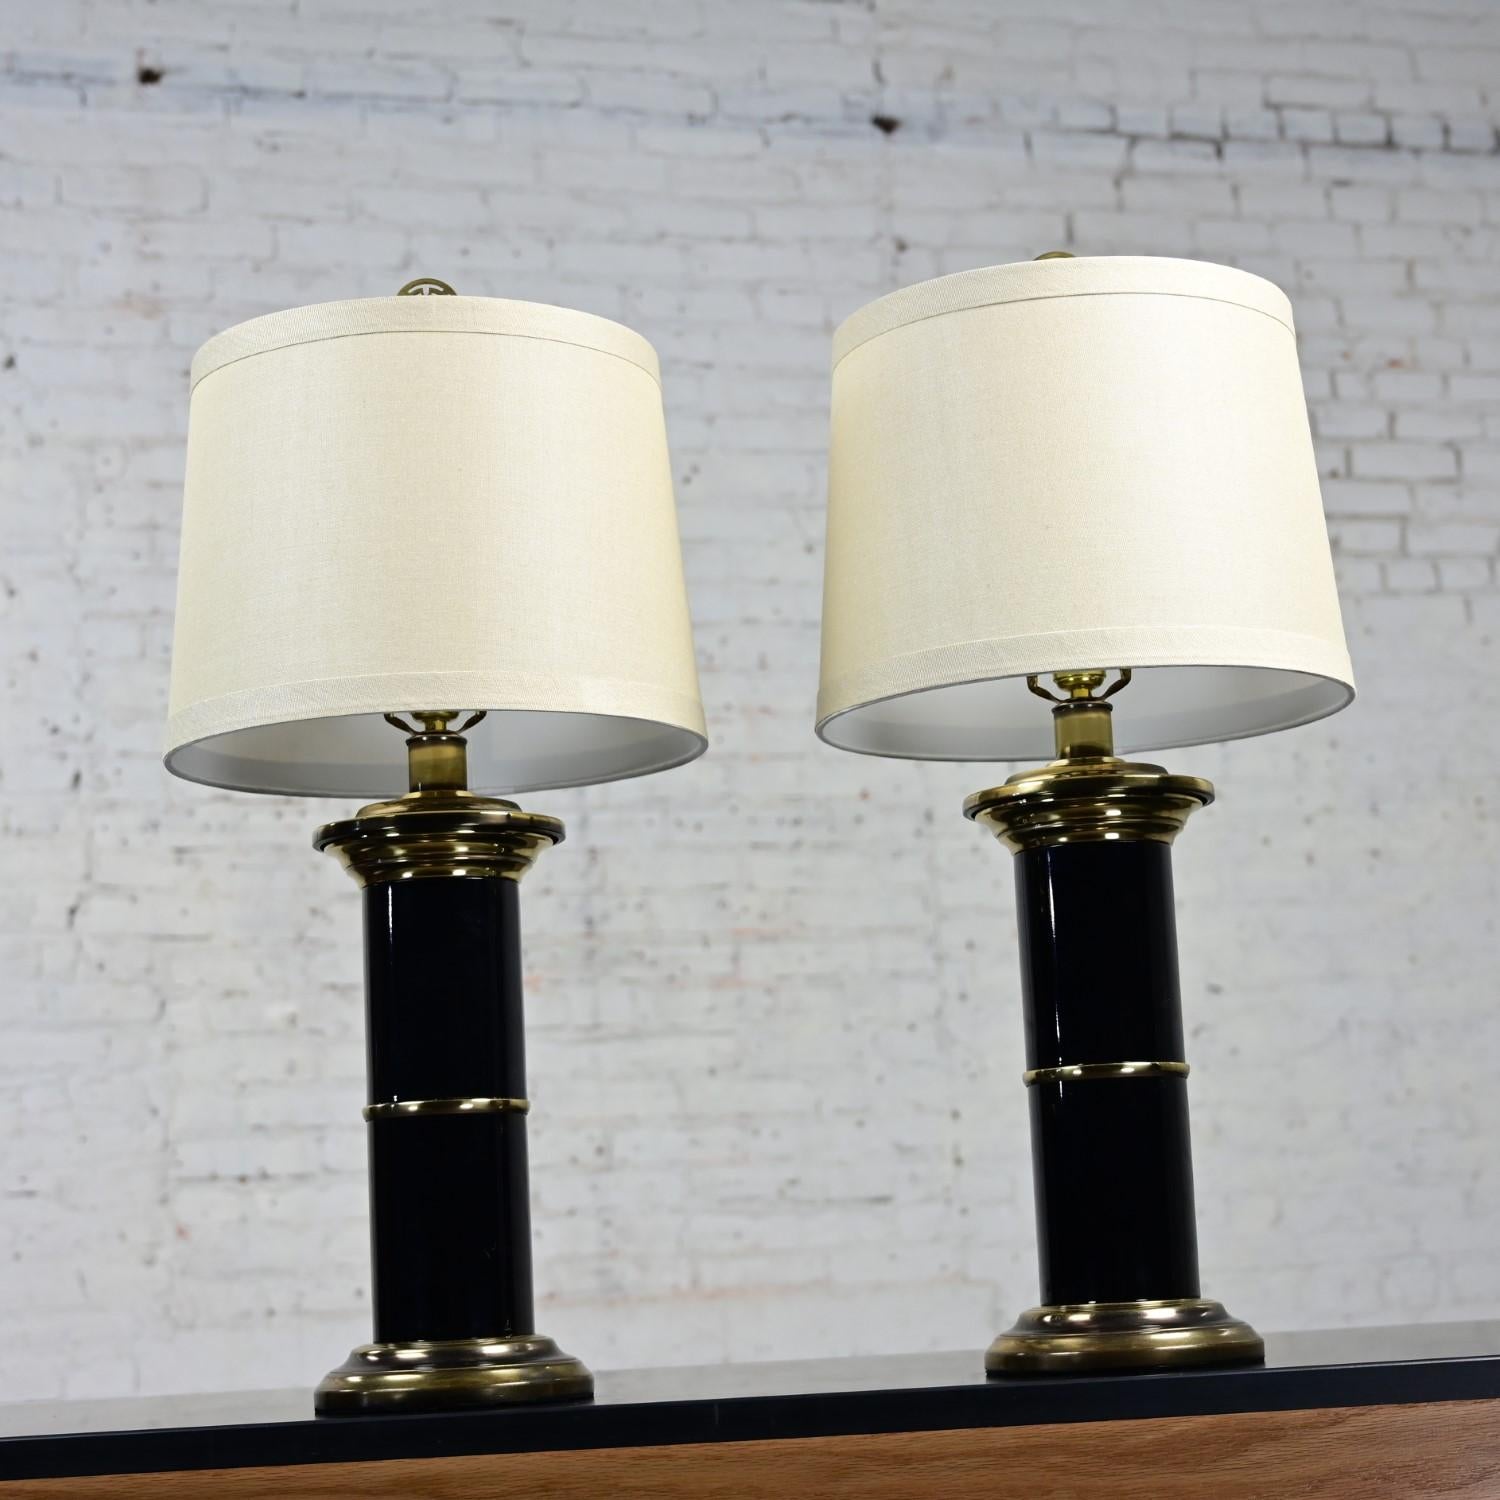 20th Century Hollywood Regency Black & Brass Plated Column Table Lamps Asian Finials a Pair For Sale